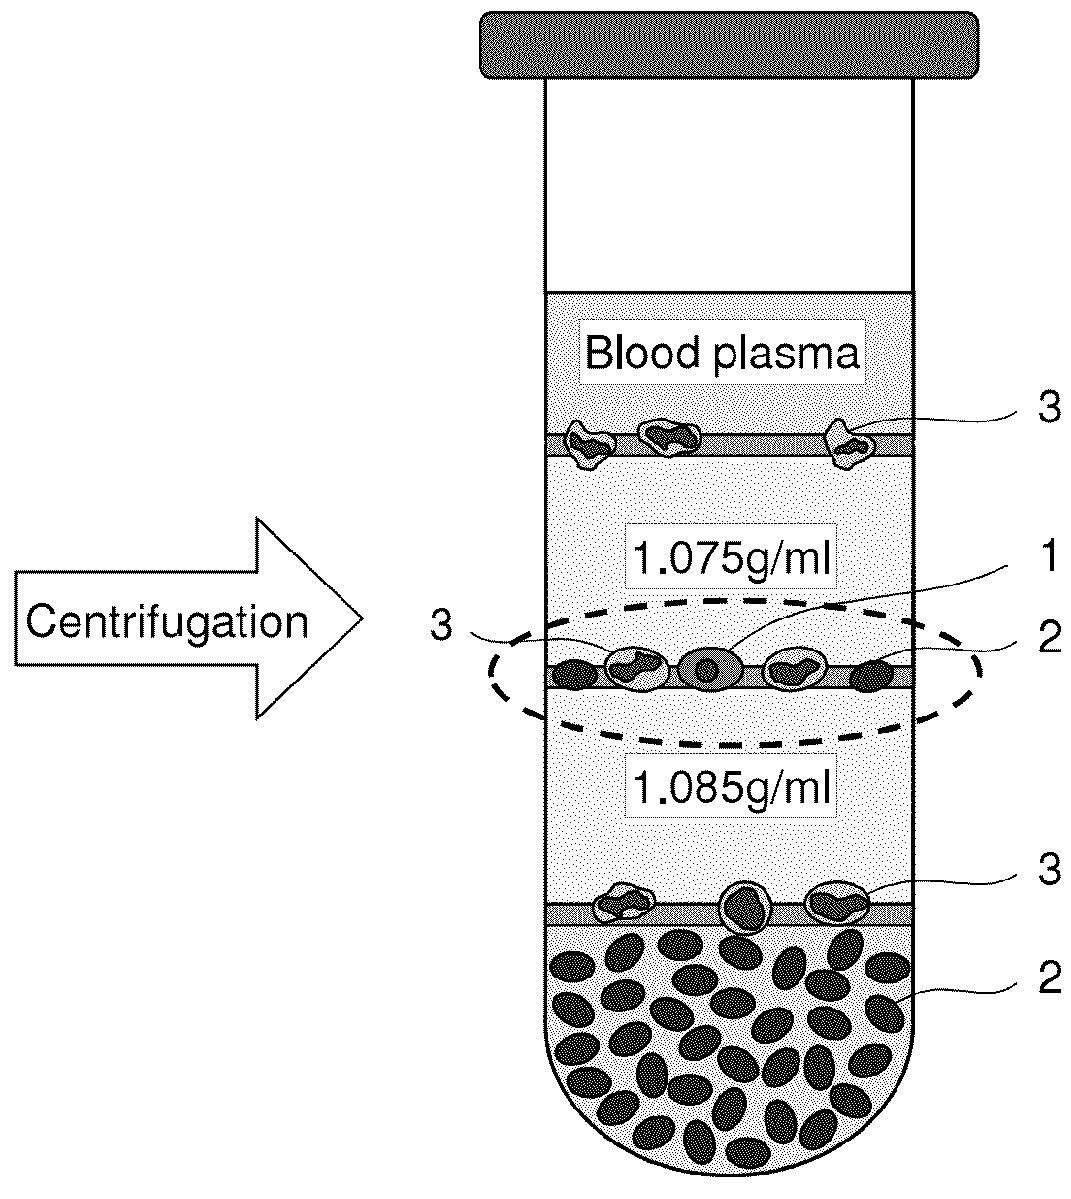 Method for collecting nucleated red blood cells via density-gradient centrifugation utilizing changes in blood cell density